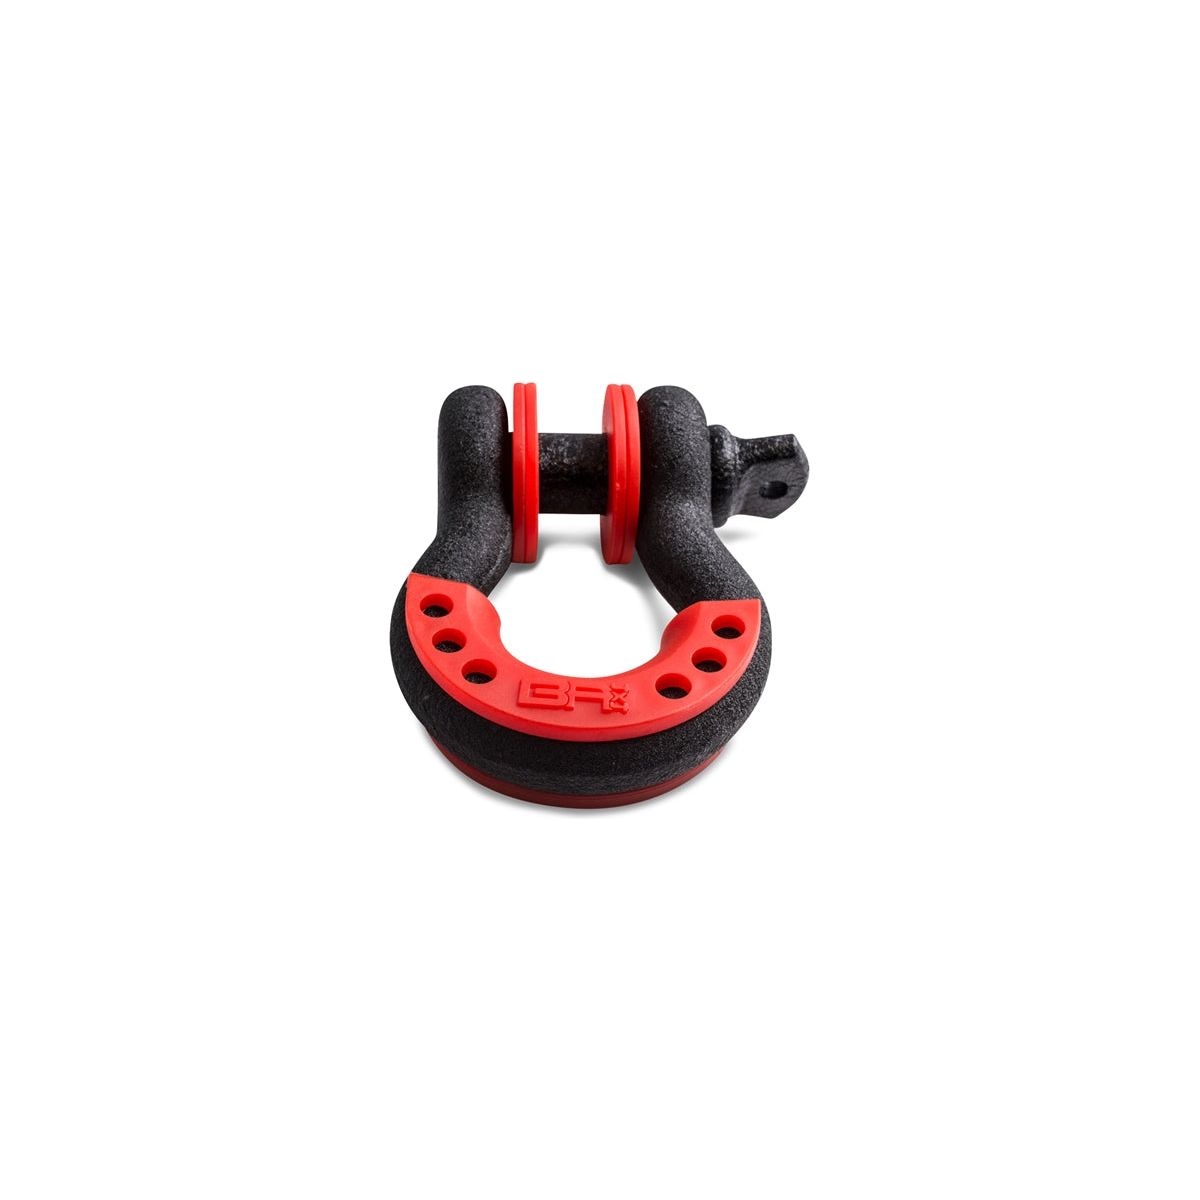 Body Armor Black D-Ring With Red Isolators